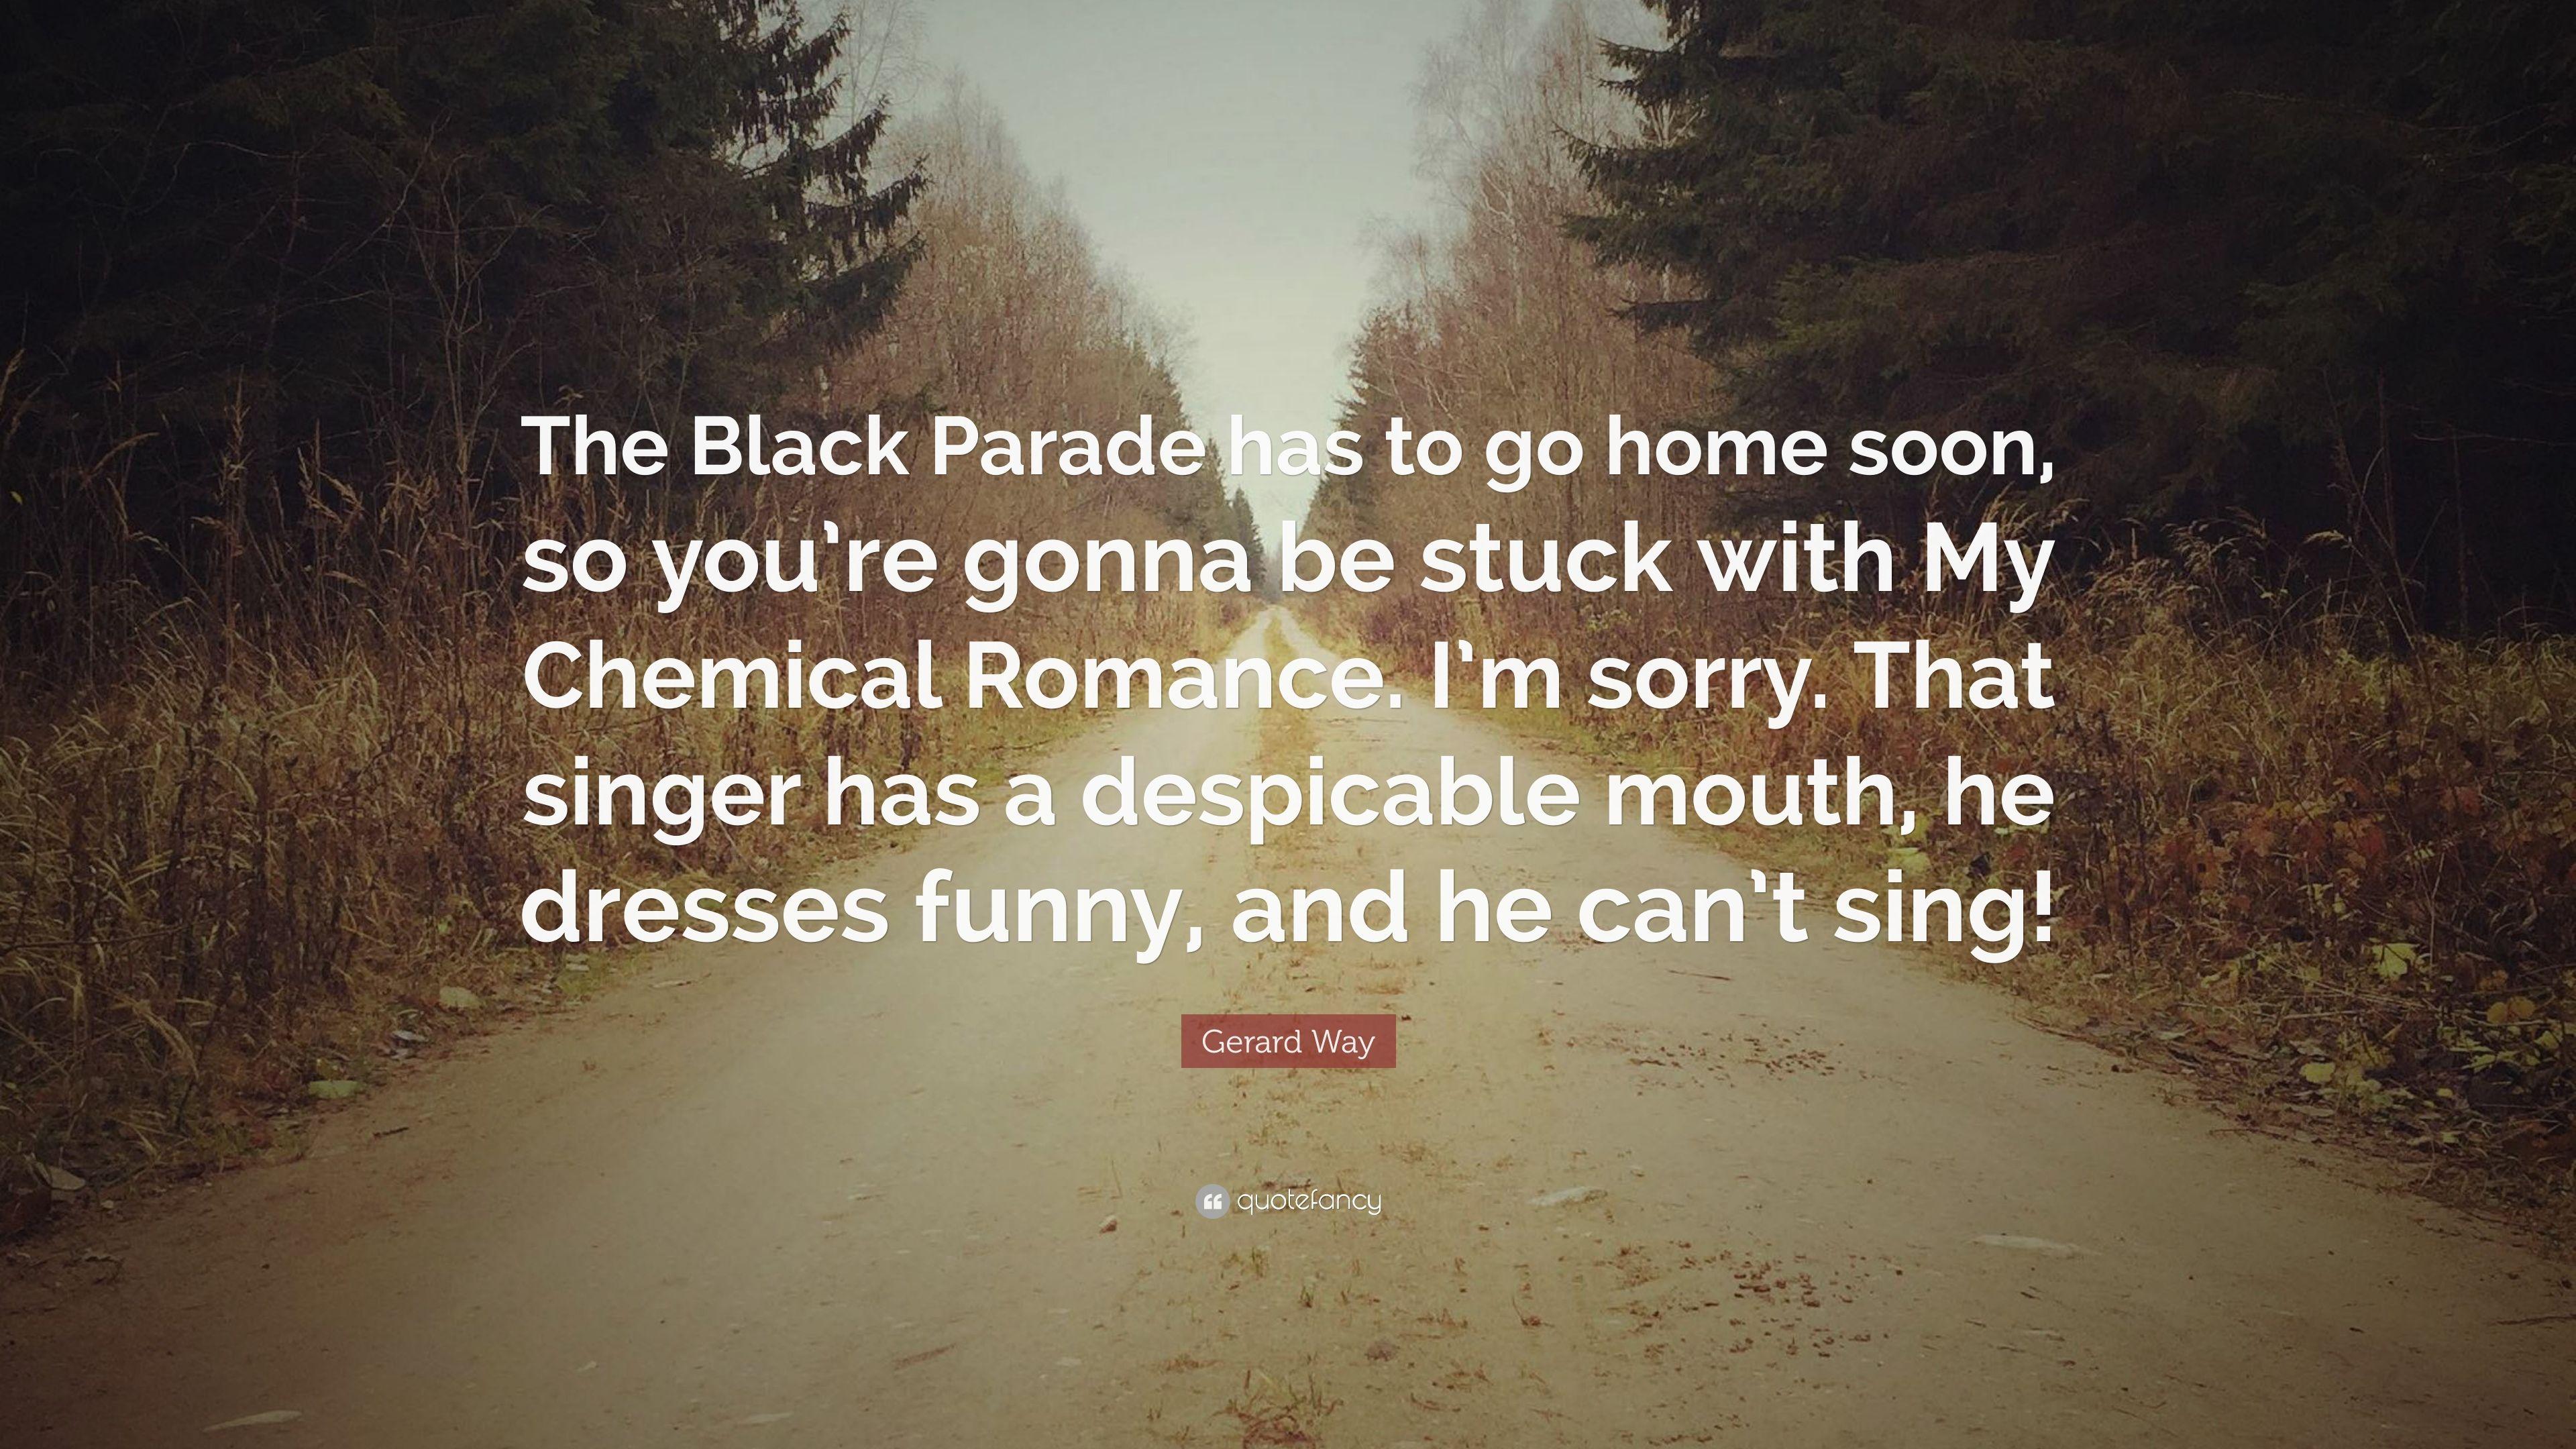 Gerard Way Quote: “The Black Parade has to go home soon, so you're